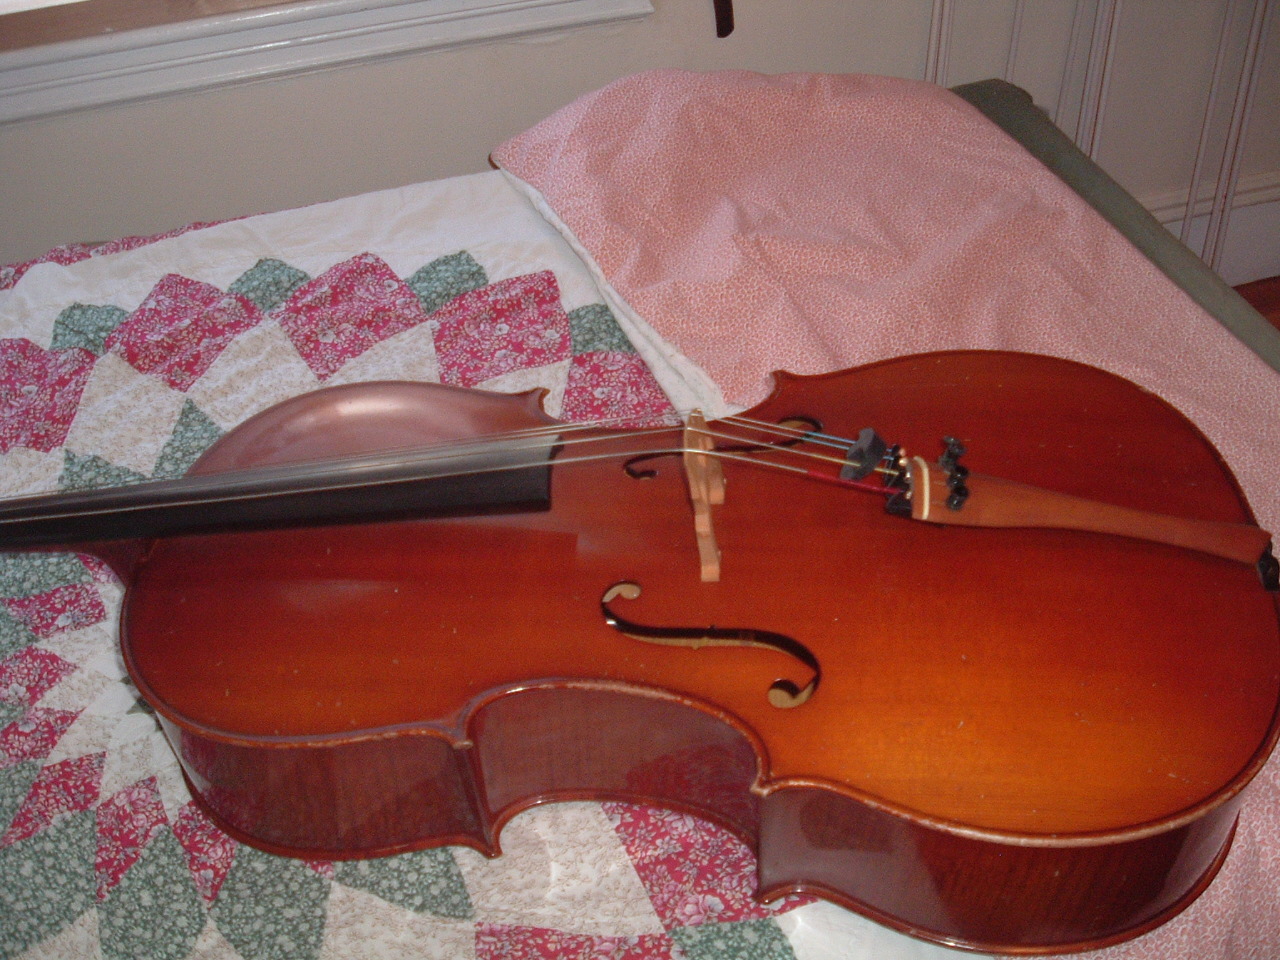 Full sized cello for sale